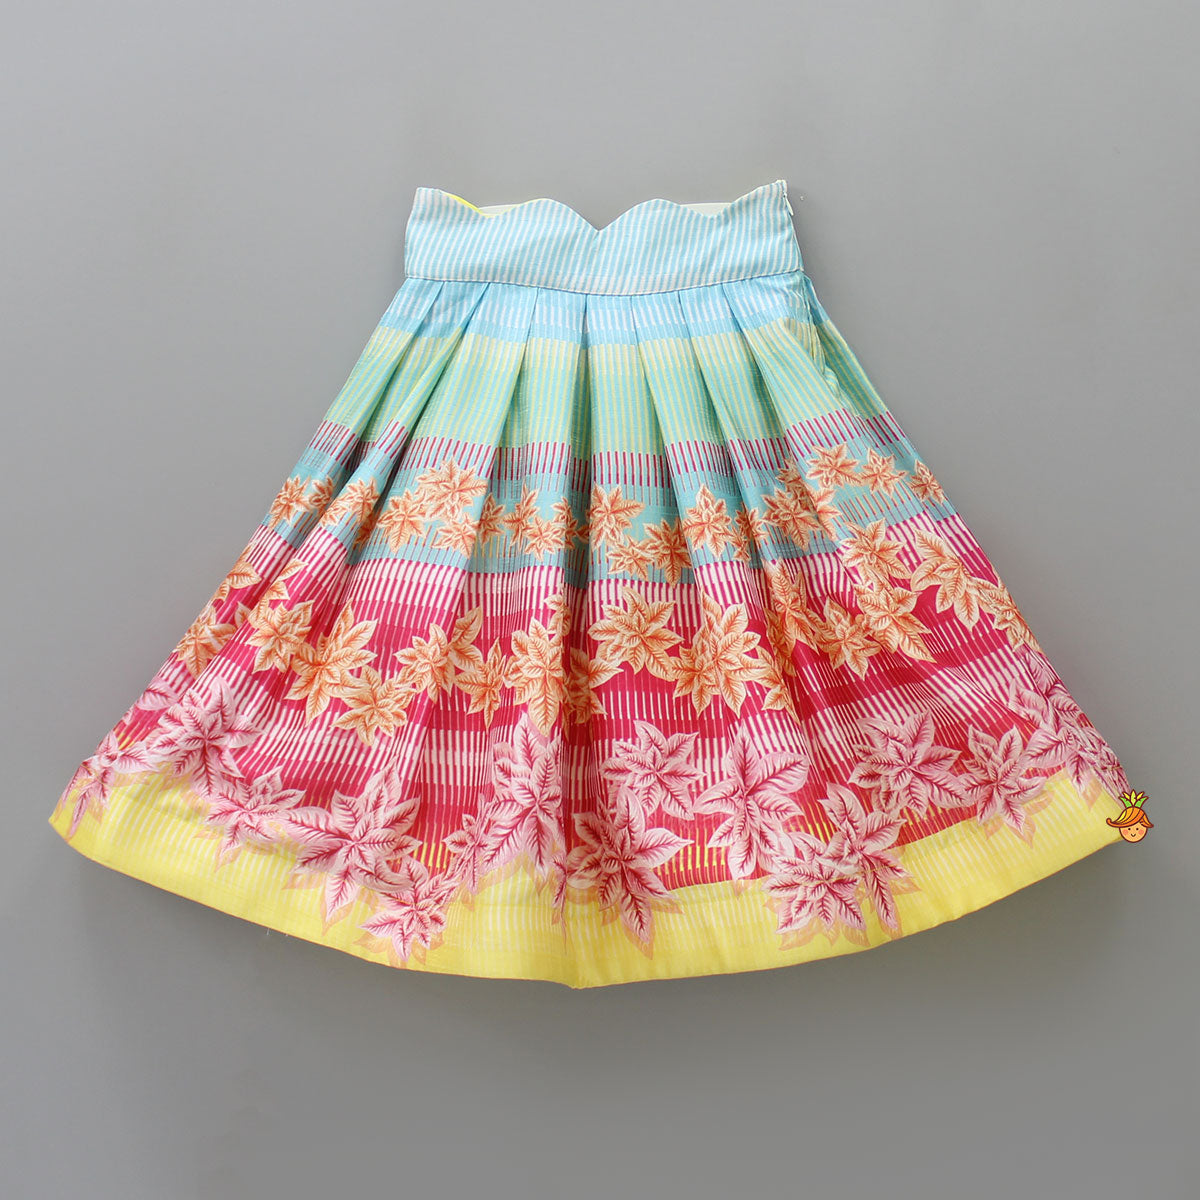 Pre Order: Scalloped Neck Yellow Organza Top And Printed Lehenga With Floral Sling Bag